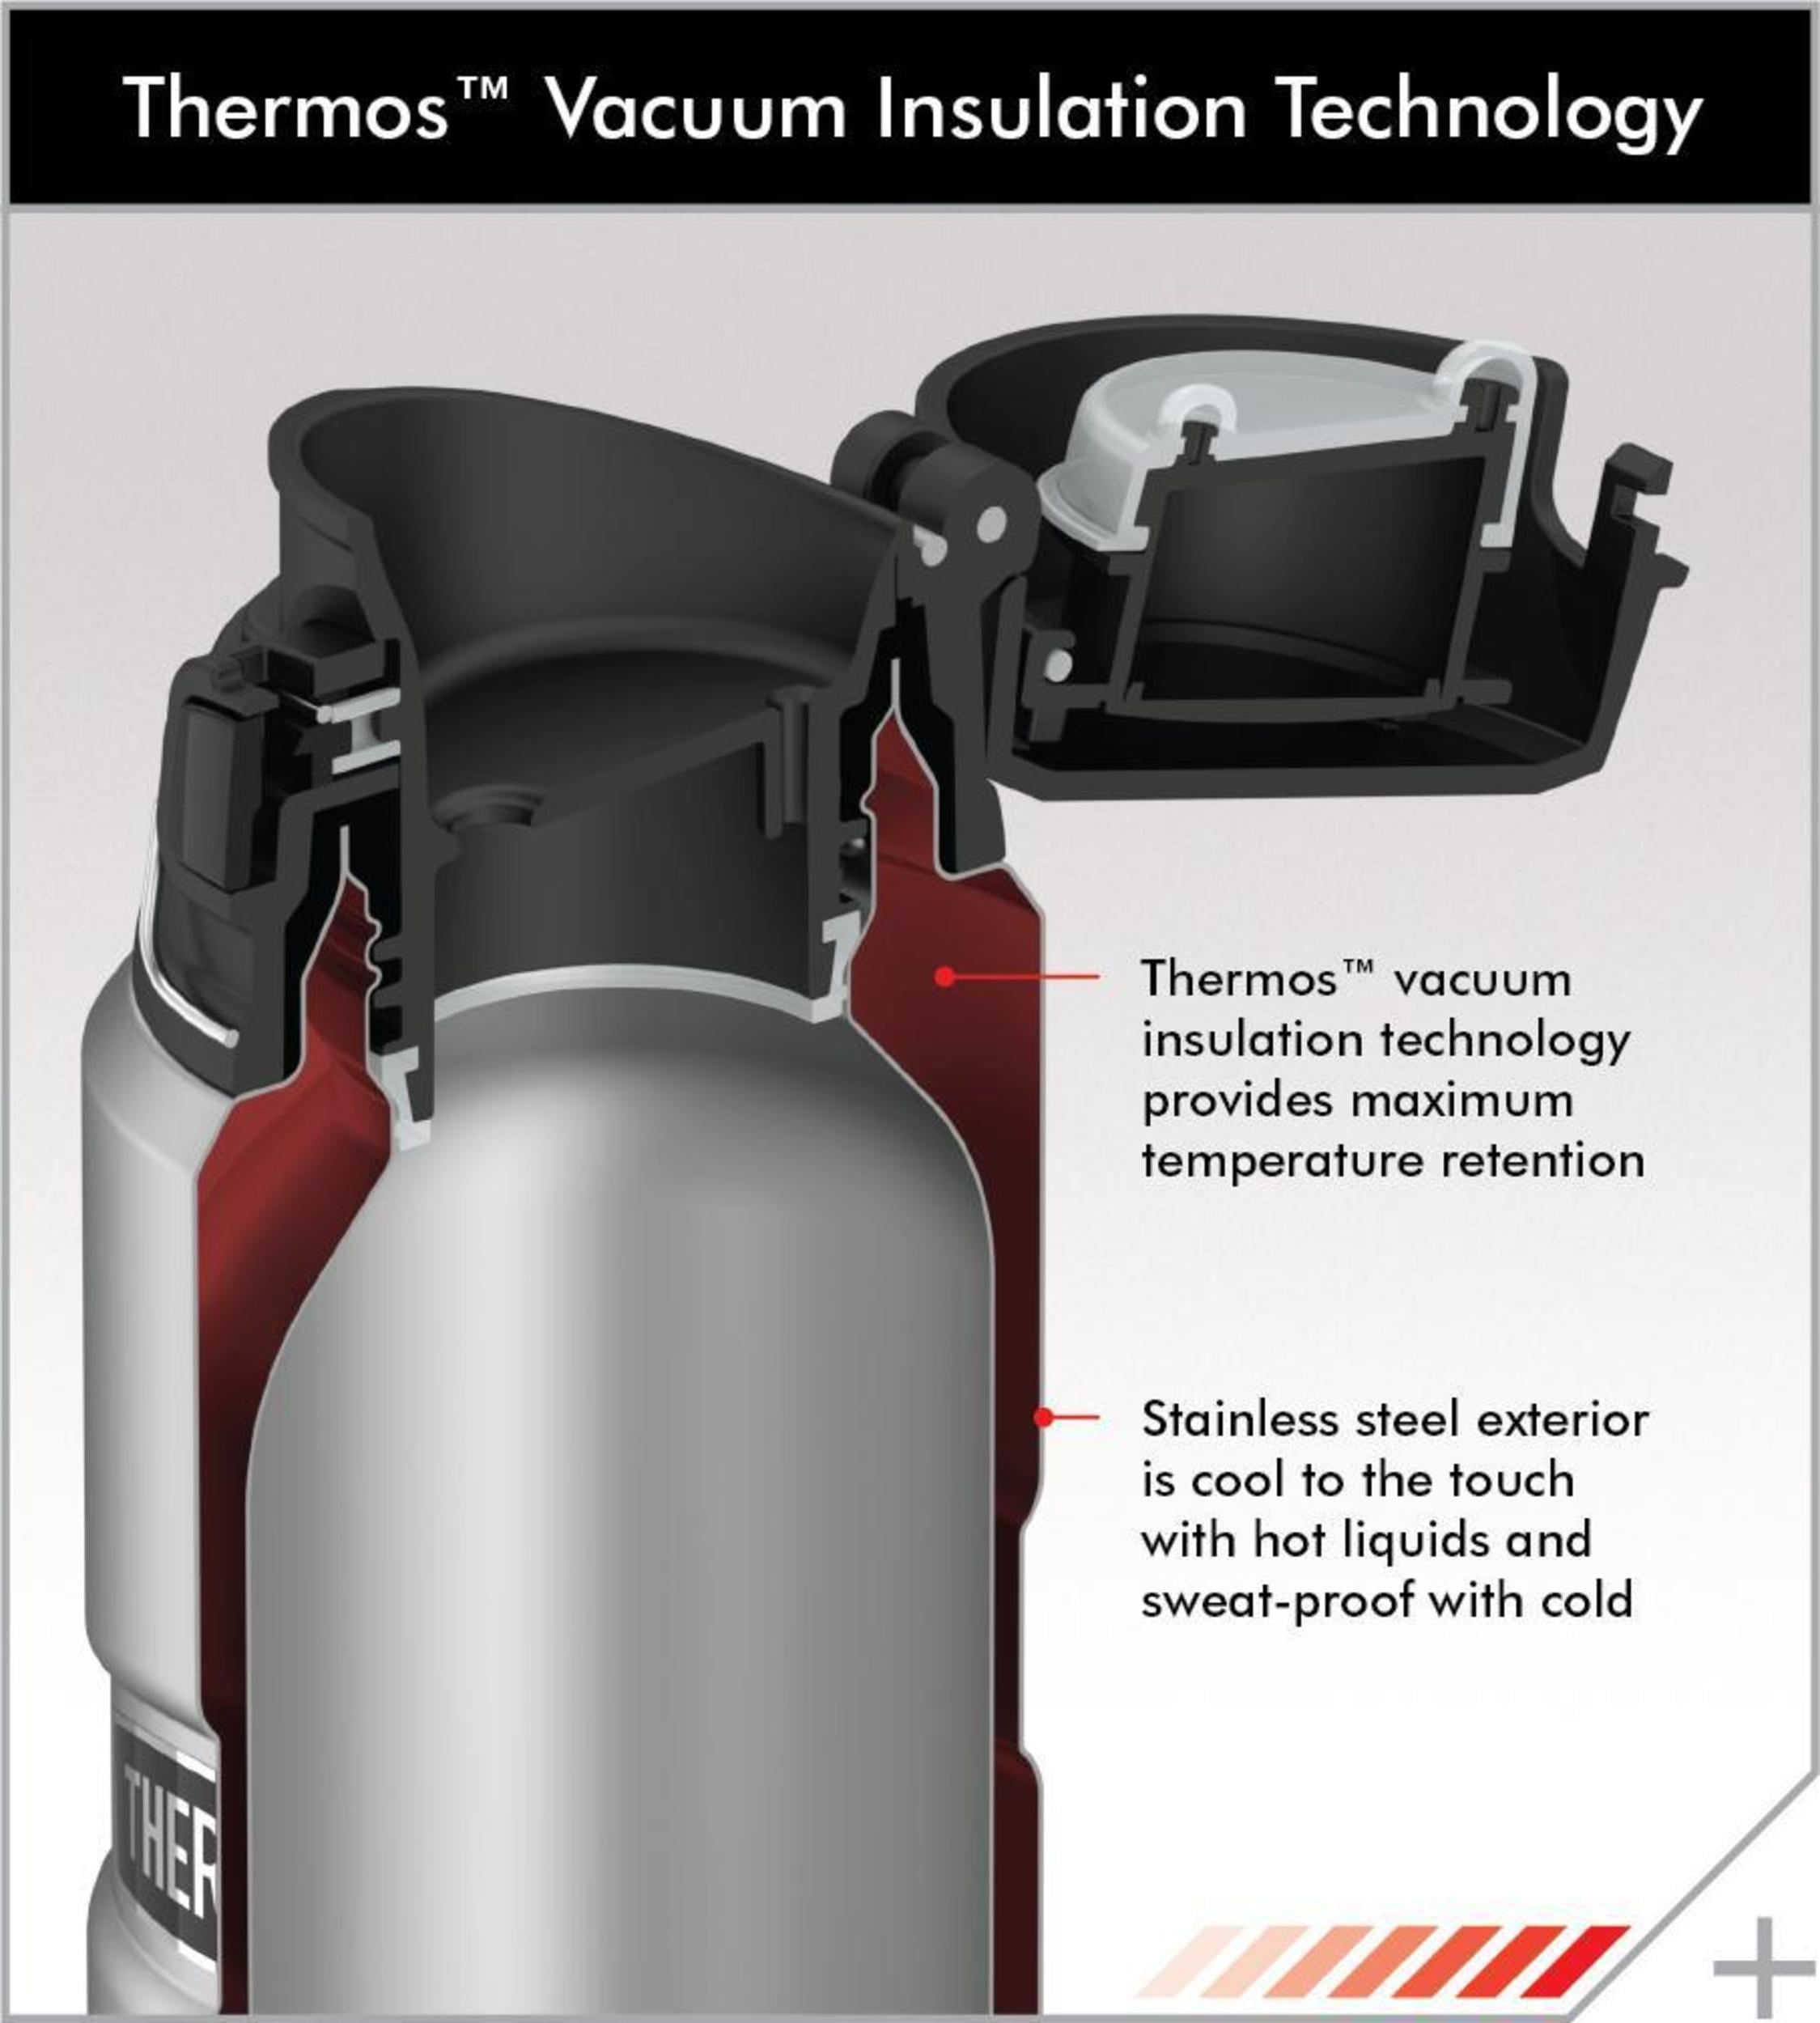 Thermos 24 Oz Vacuum Insulated Direct Drink Beverage Bottle